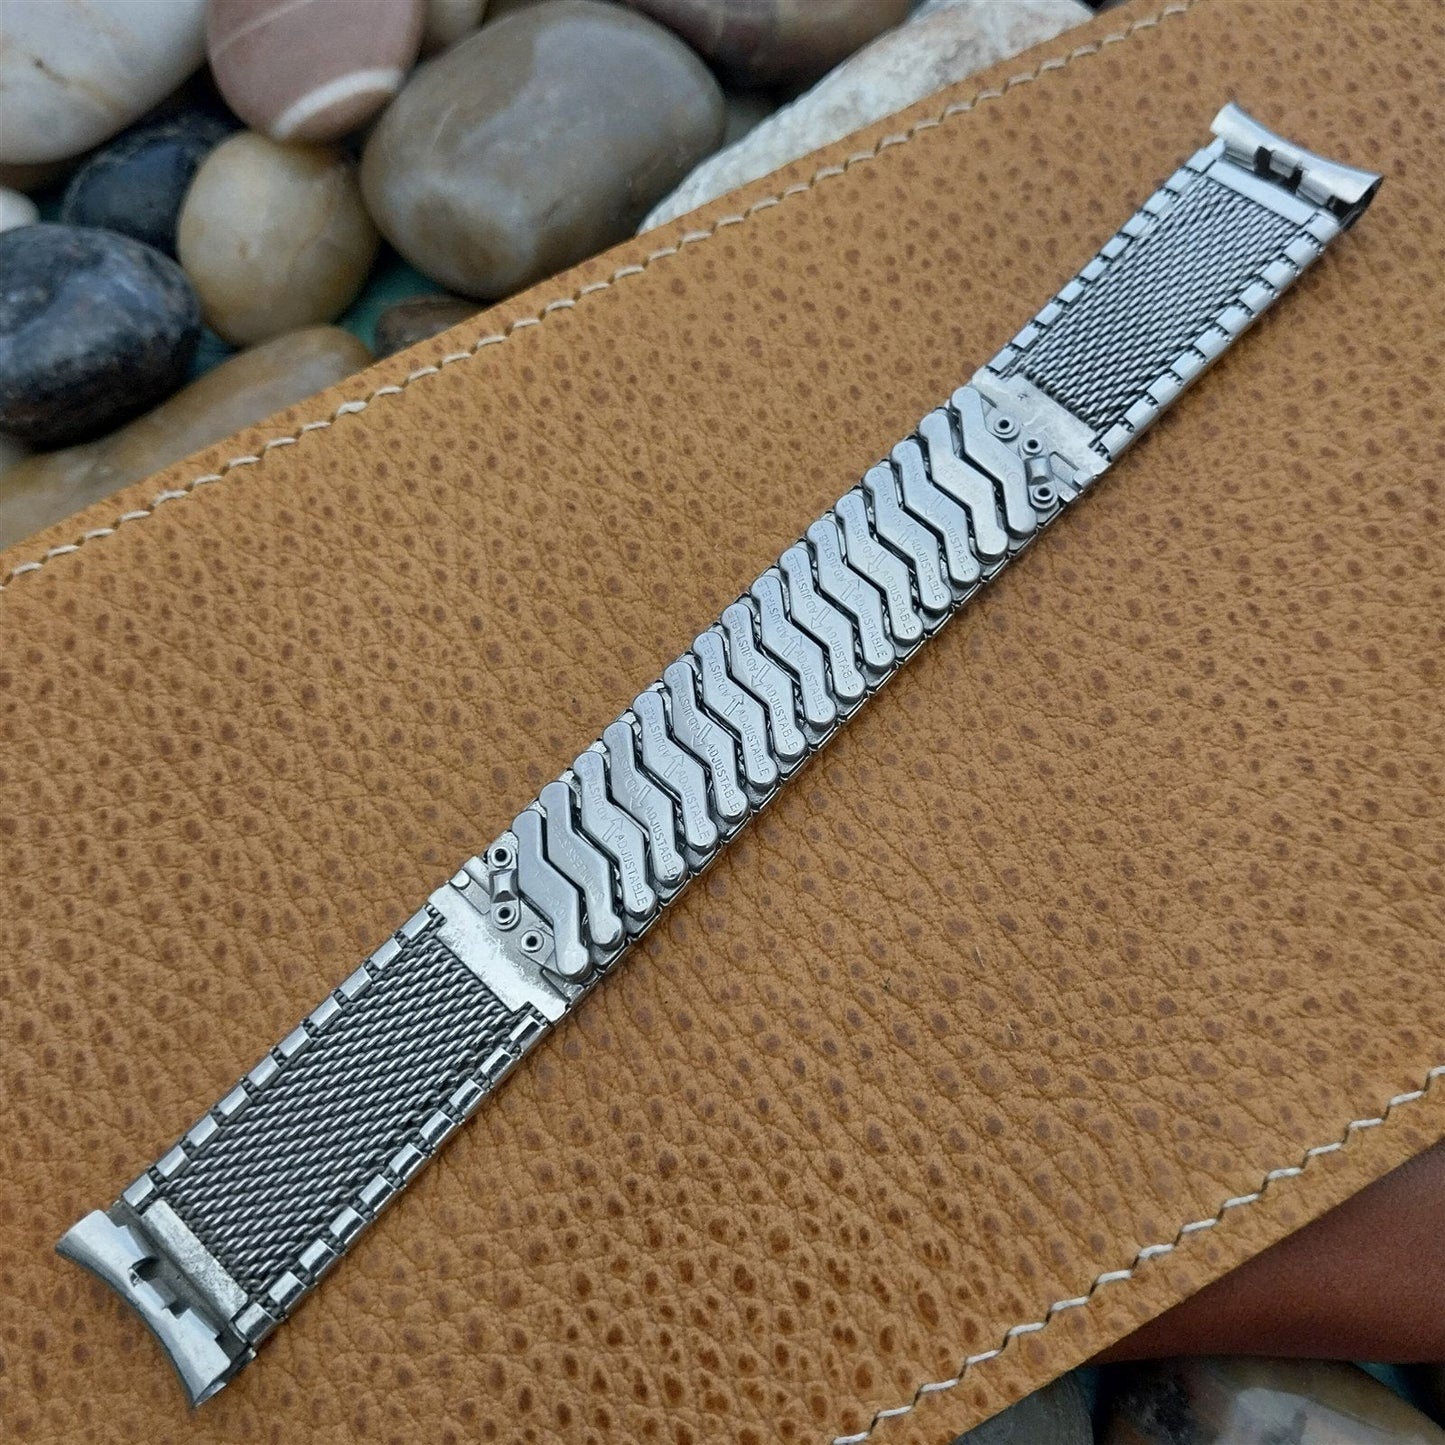 17mm Gruen Perry Baldwin Stainless Steel Expansion nos 1960s Vintage Watch Band